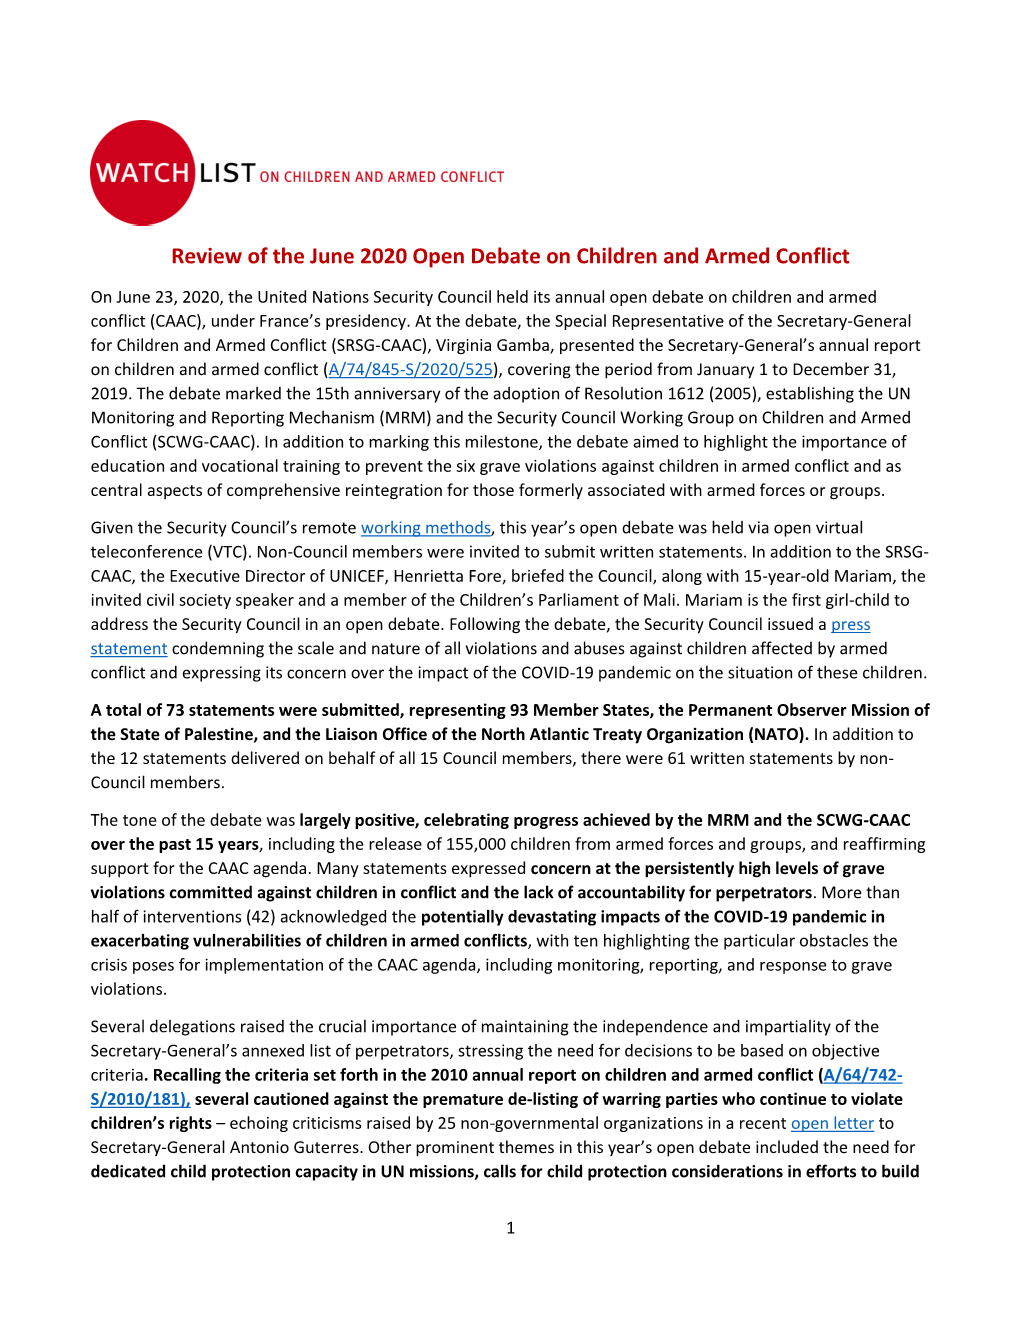 Review of the June 2020 Open Debate on Children and Armed Conflict